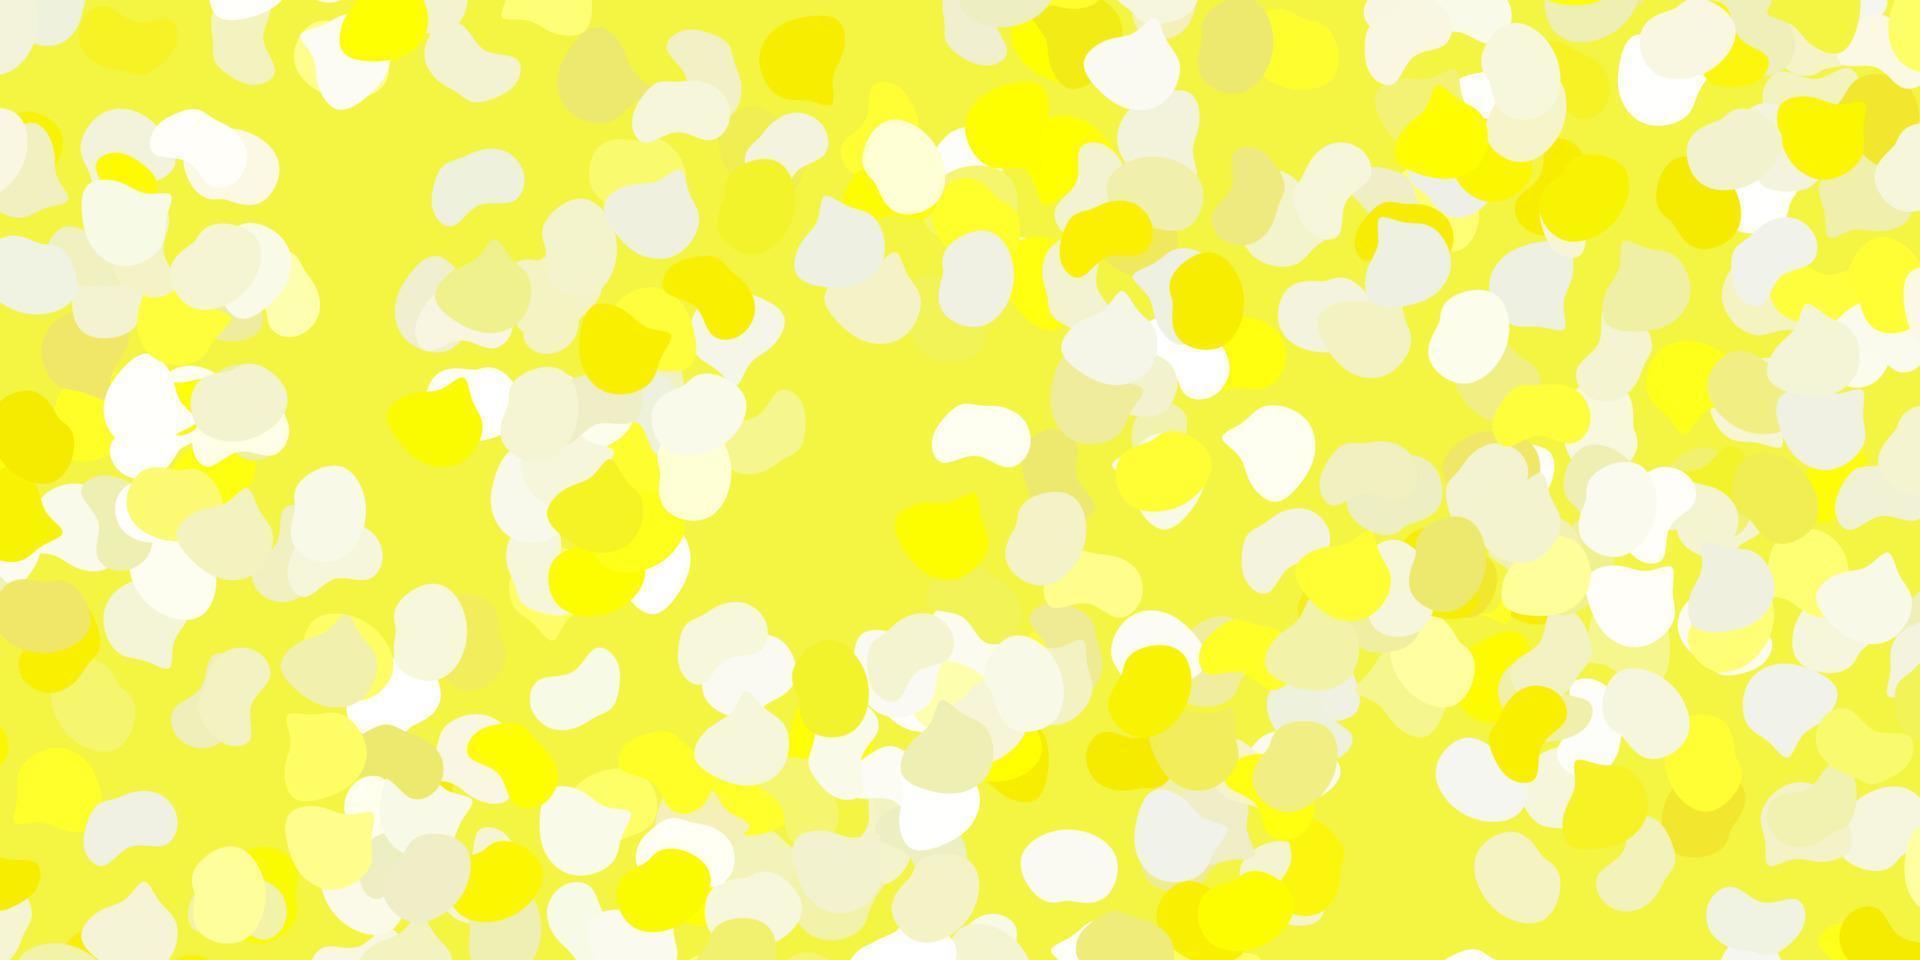 A yellow and white abstract image - Light yellow